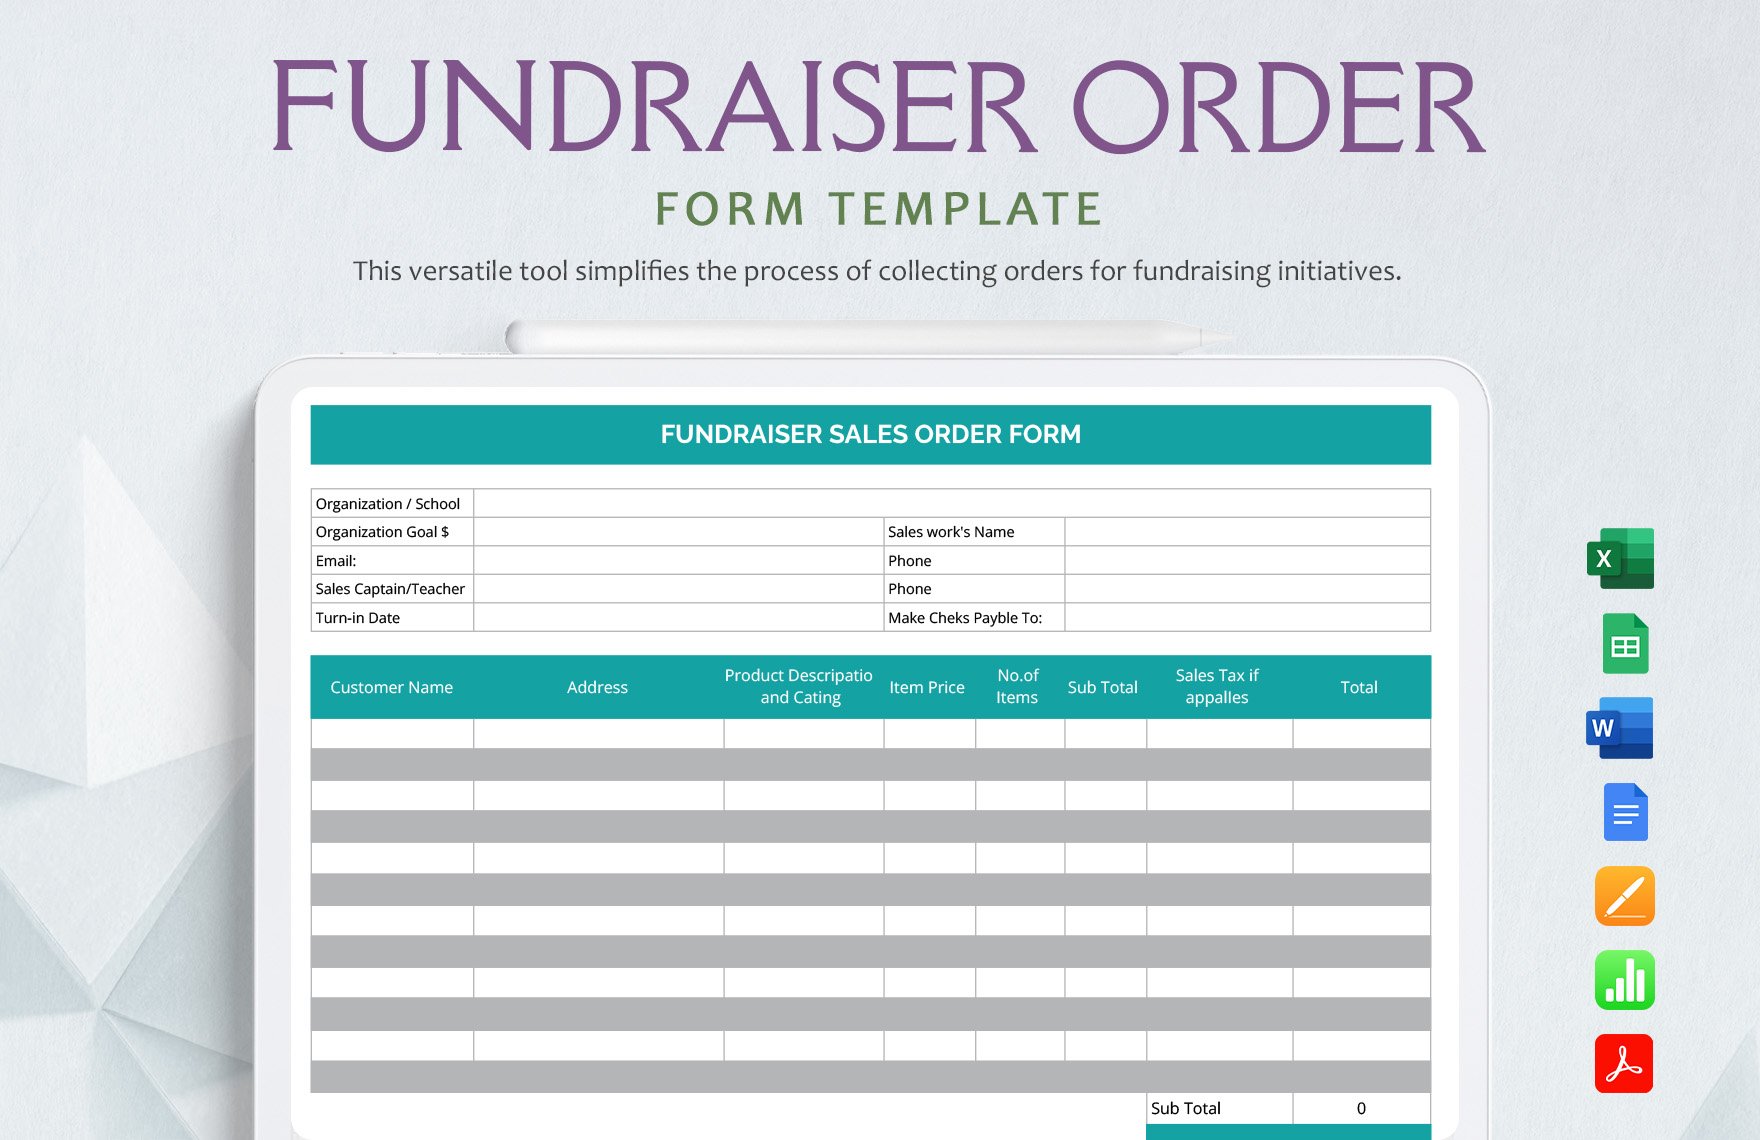 Fundraiser Order Form Template in Word, Google Docs, Excel, PDF, Google Sheets, Apple Pages, Apple Numbers